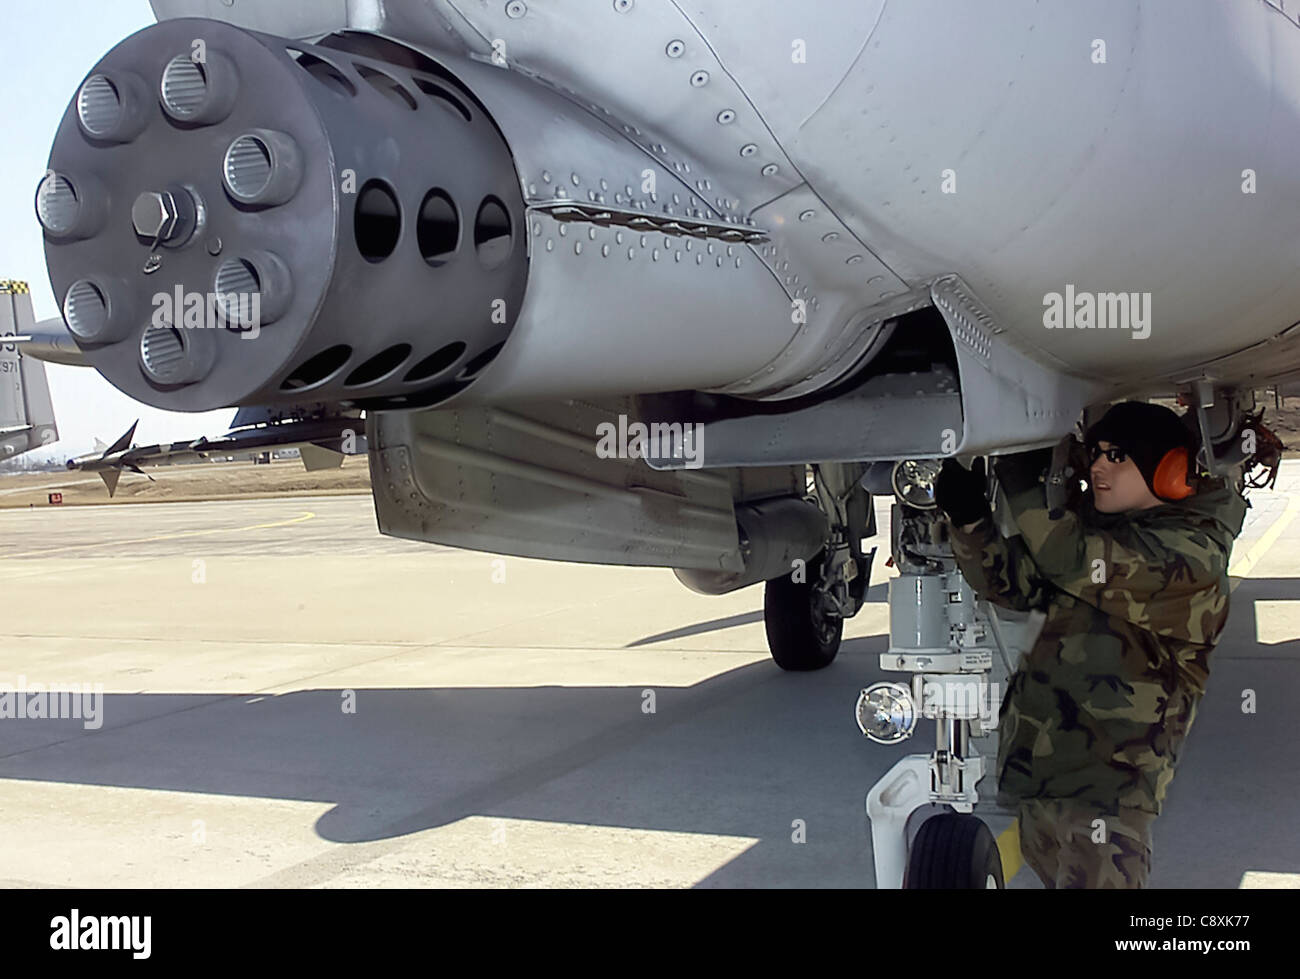 OSAN AIR BASE, Korea -- Senior Airman Andres L. Munoz inspects the gatling gun of an A-10 Thunderbolt II during an end of runway inspection here March 3. Senior Airman Munoz is a weapons specialist with the 51st Aircraft Maintenance Squadron. Stock Photo